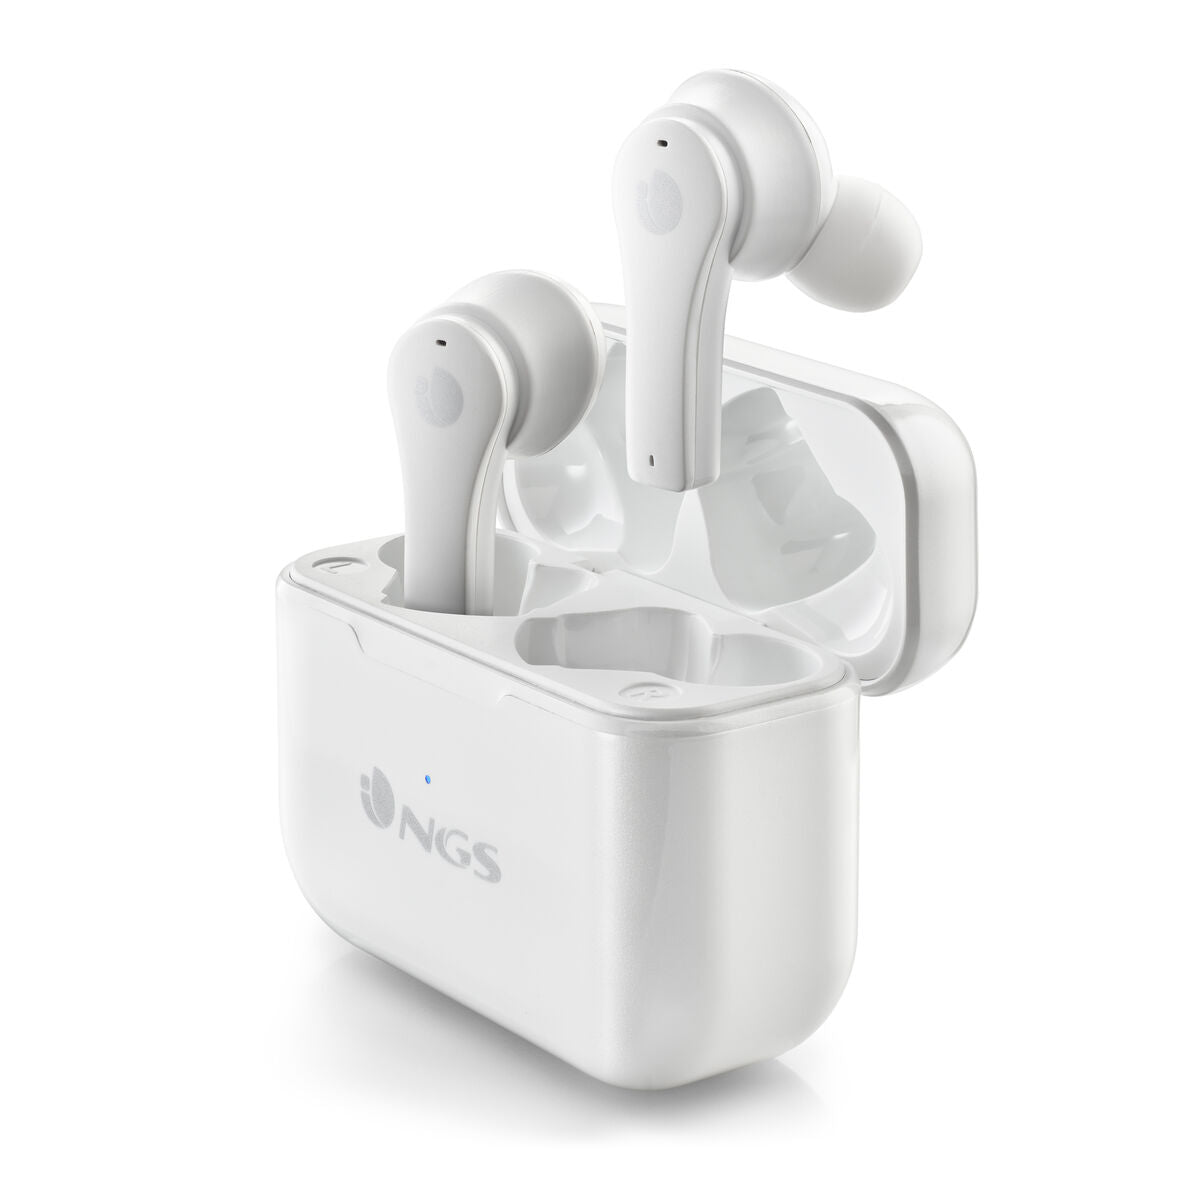 Bluetooth Headphones NGS ARTICA BLOOM WHITE White Black, NGS, Electronics, Mobile communication and accessories, bluetooth-headphones-ngs-artica-bloom-white-white-black, Brand_NGS, category-reference-2609, category-reference-2642, category-reference-2847, category-reference-t-19653, category-reference-t-21312, category-reference-t-4036, category-reference-t-4037, computers / peripherals, Condition_NEW, entertainment, gadget, music, office, Price_20 - 50, telephones & tablets, Teleworking, RiotNook